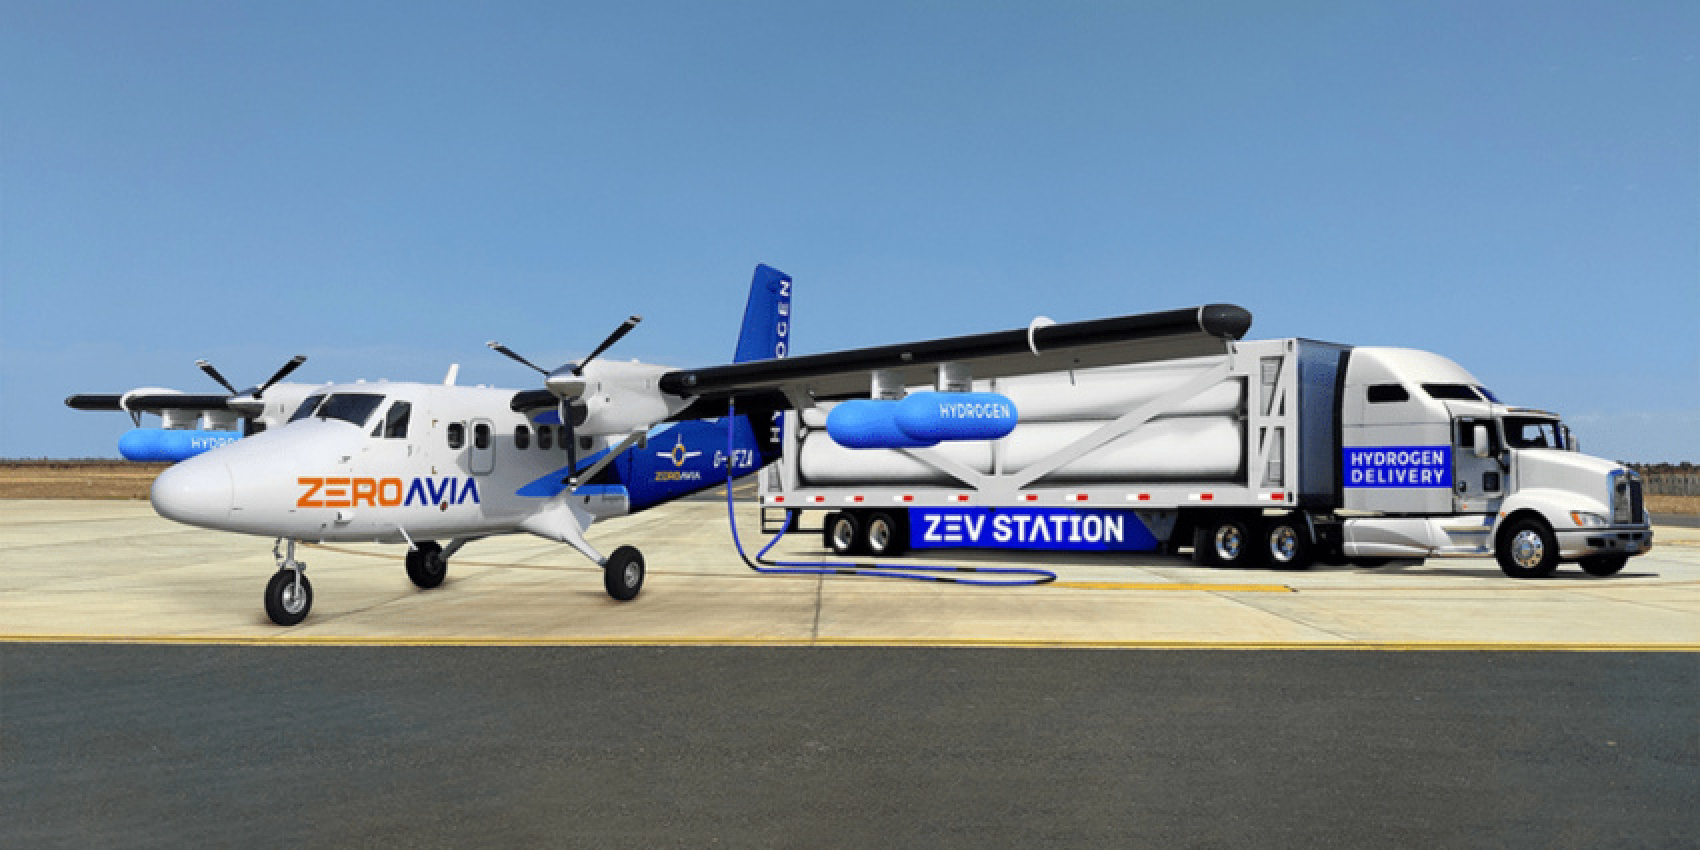 air, autos, cars, electric vehicle, aviation, california, h2 refuelling stations, hydrogen aircraft, zeroavia, zev station, zeroavia says airports will become hydrogen hubs